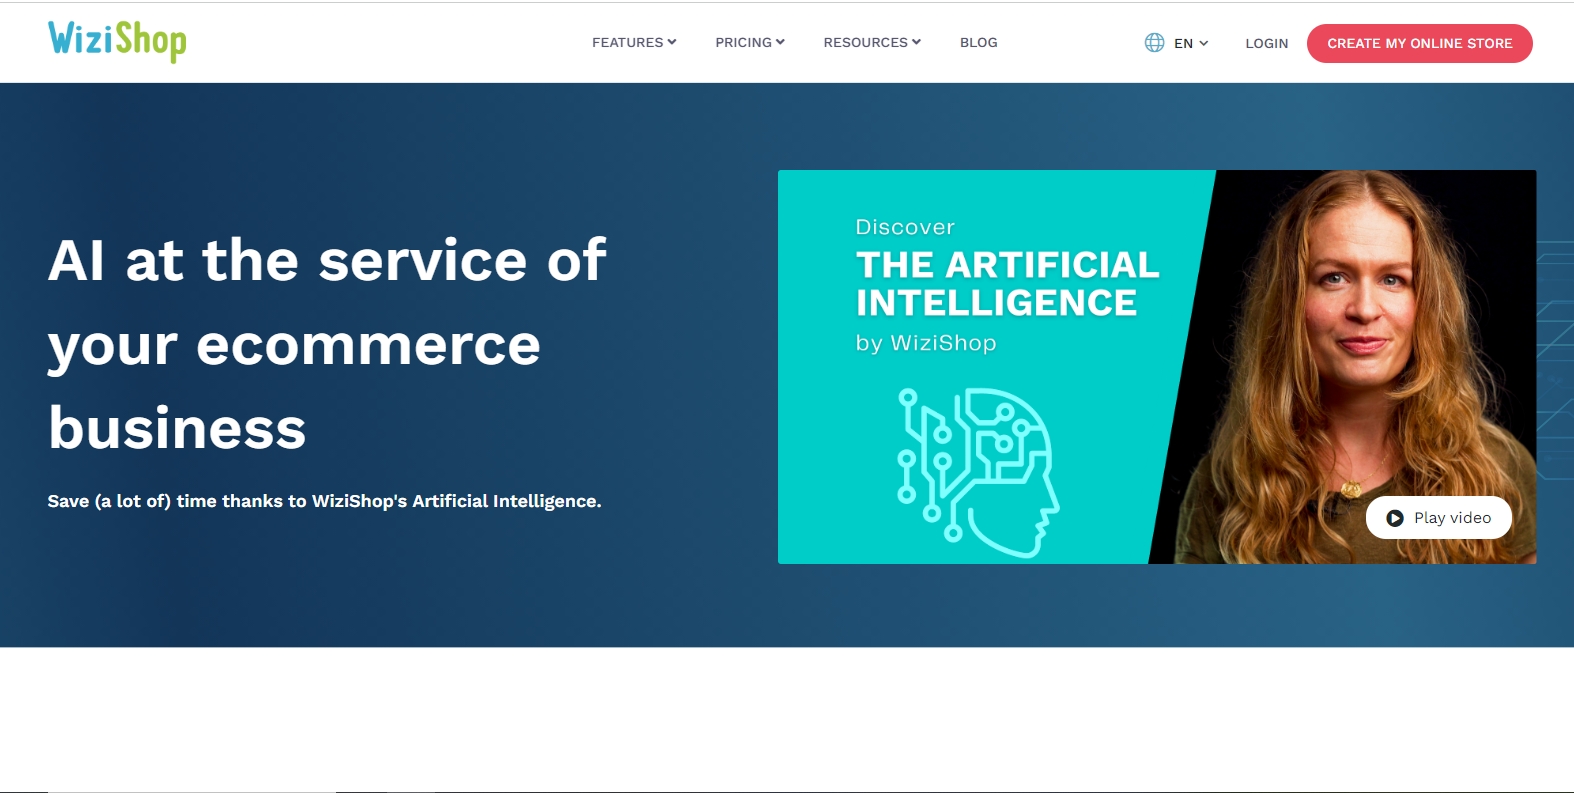 WiziShop: AI-Powered E-commerce Platform | All-in-One Platform